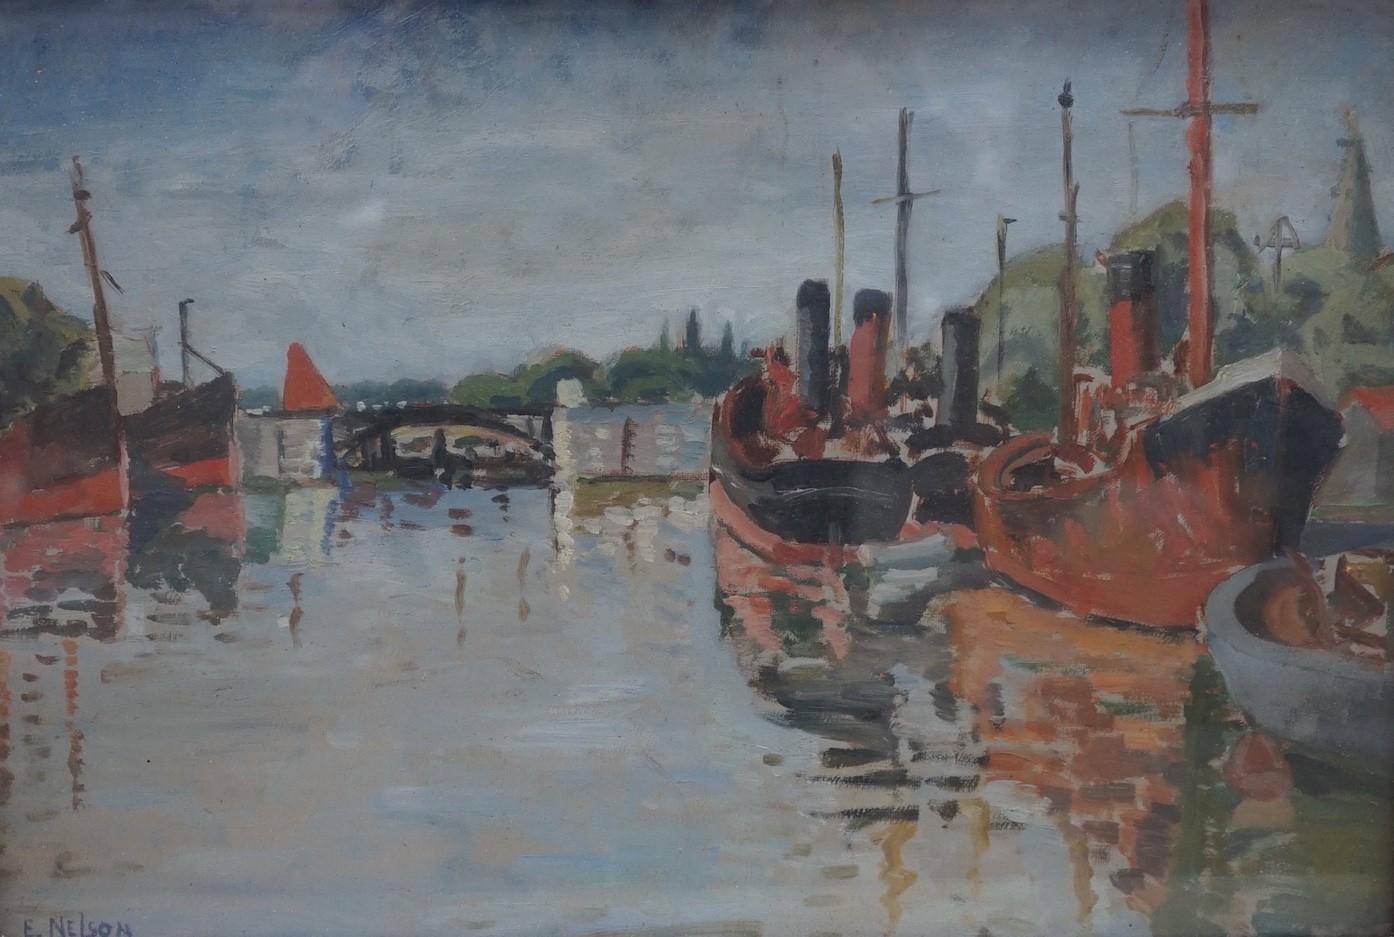 Miss E. Nelson (Exh. 1890), oil on canvas, Shipping moored in harbour, signed, 37 x 54cm